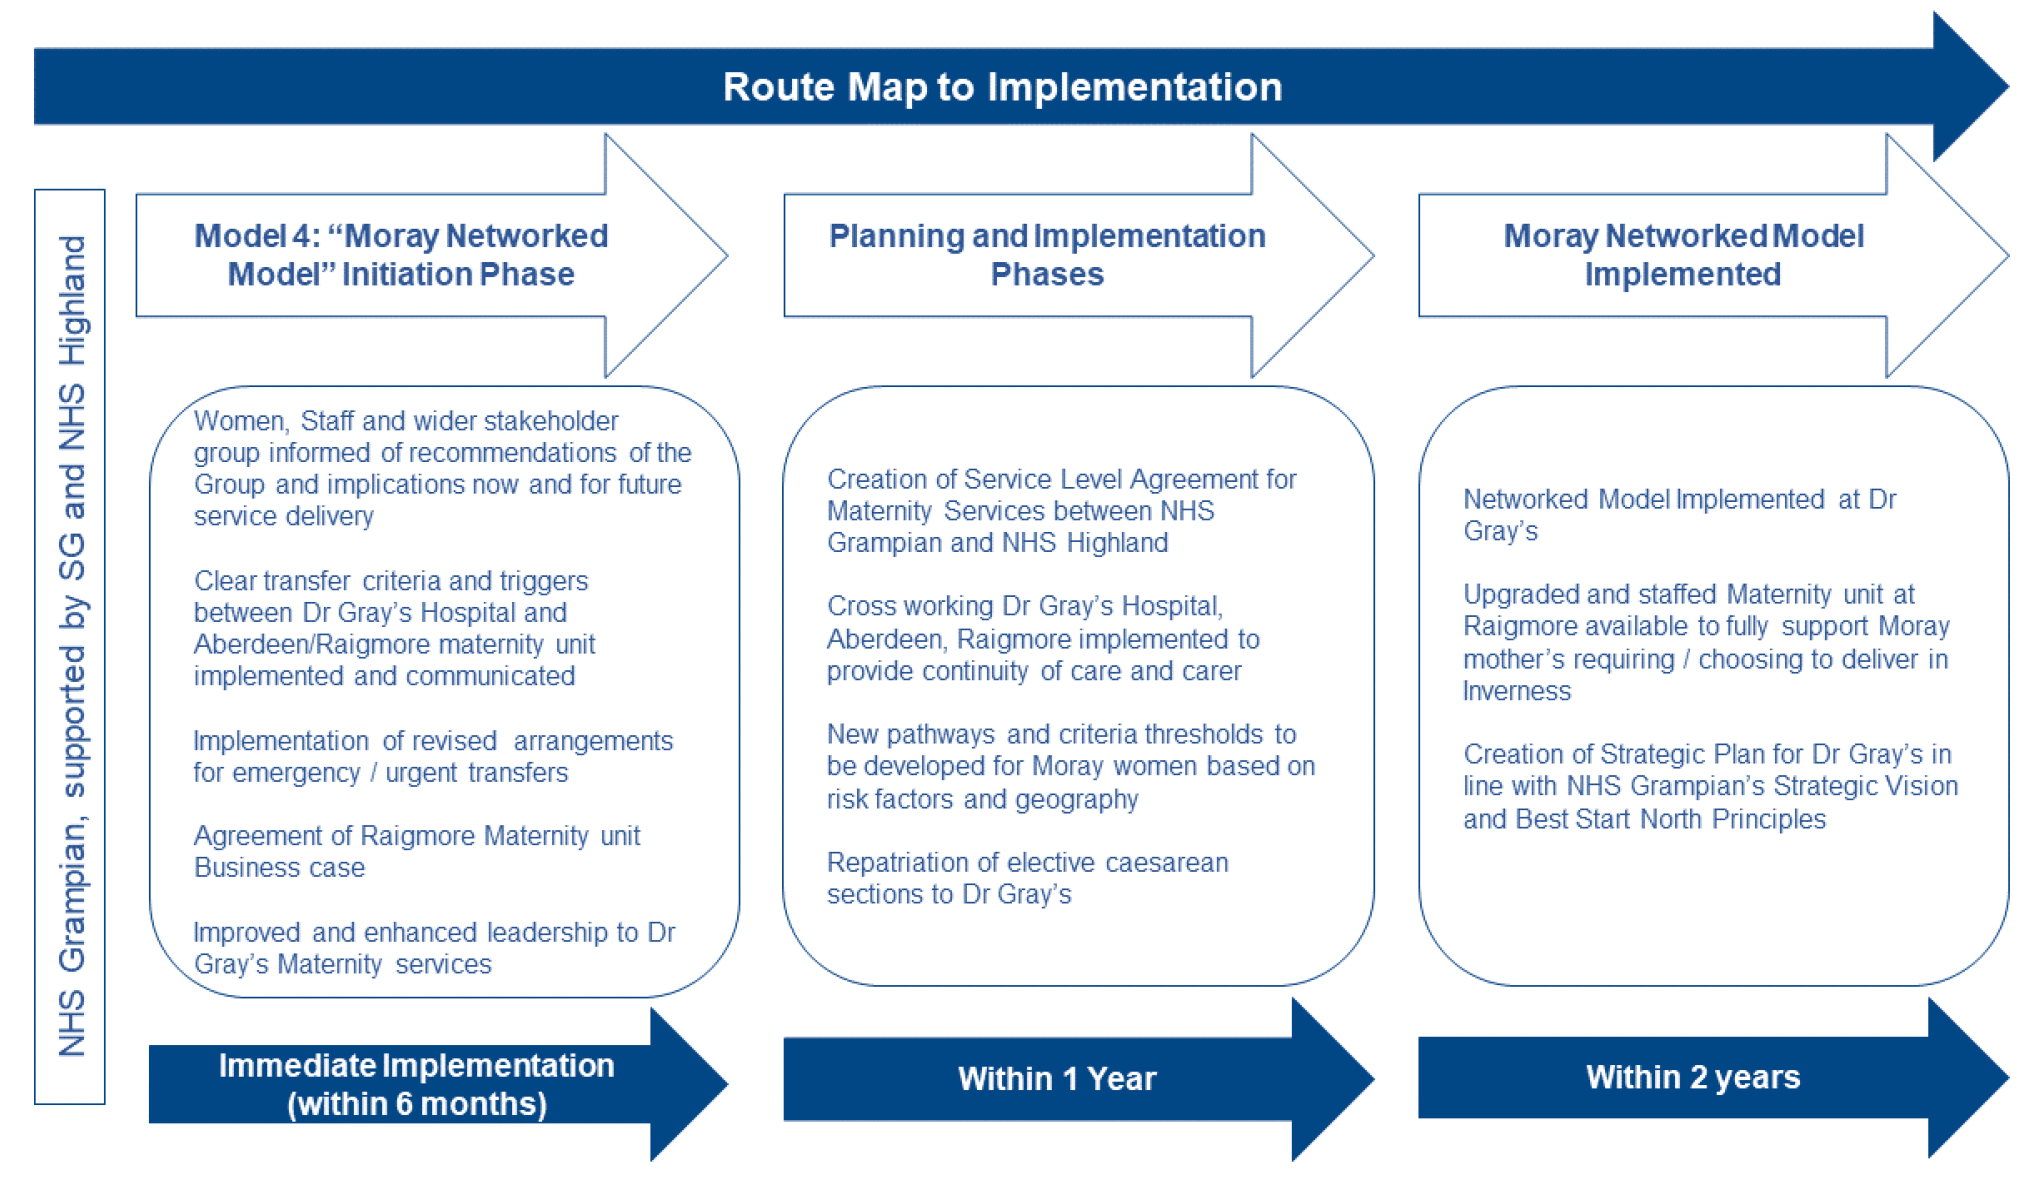 The Route Map shows the planning and implementation phases for implementing Model 4: Community Maternity Unit linked to Raigmore (also referred to as the “Moray Networked Model”).  All implementation is to be managed by NHS Grampian, in conjunction with NHS Highland, and supported by the Scottish Government.  The first diagram shows activity required for immediate implementation, within 6 months.  Planning and implementation phases – within one year.  Moray Networked Model implemented within two years.  The second image illustrates Key Considerations / Contingencies for 2 to 10 years – Future Service Configuration Opportunities, 2 to 5 years scoping of a Rural Consultant-supported Maternity Unit at Dr Gray’s.  5-10 years and beyond looks at ongoing evaluation and assessment of the Moray Maternity Model. 